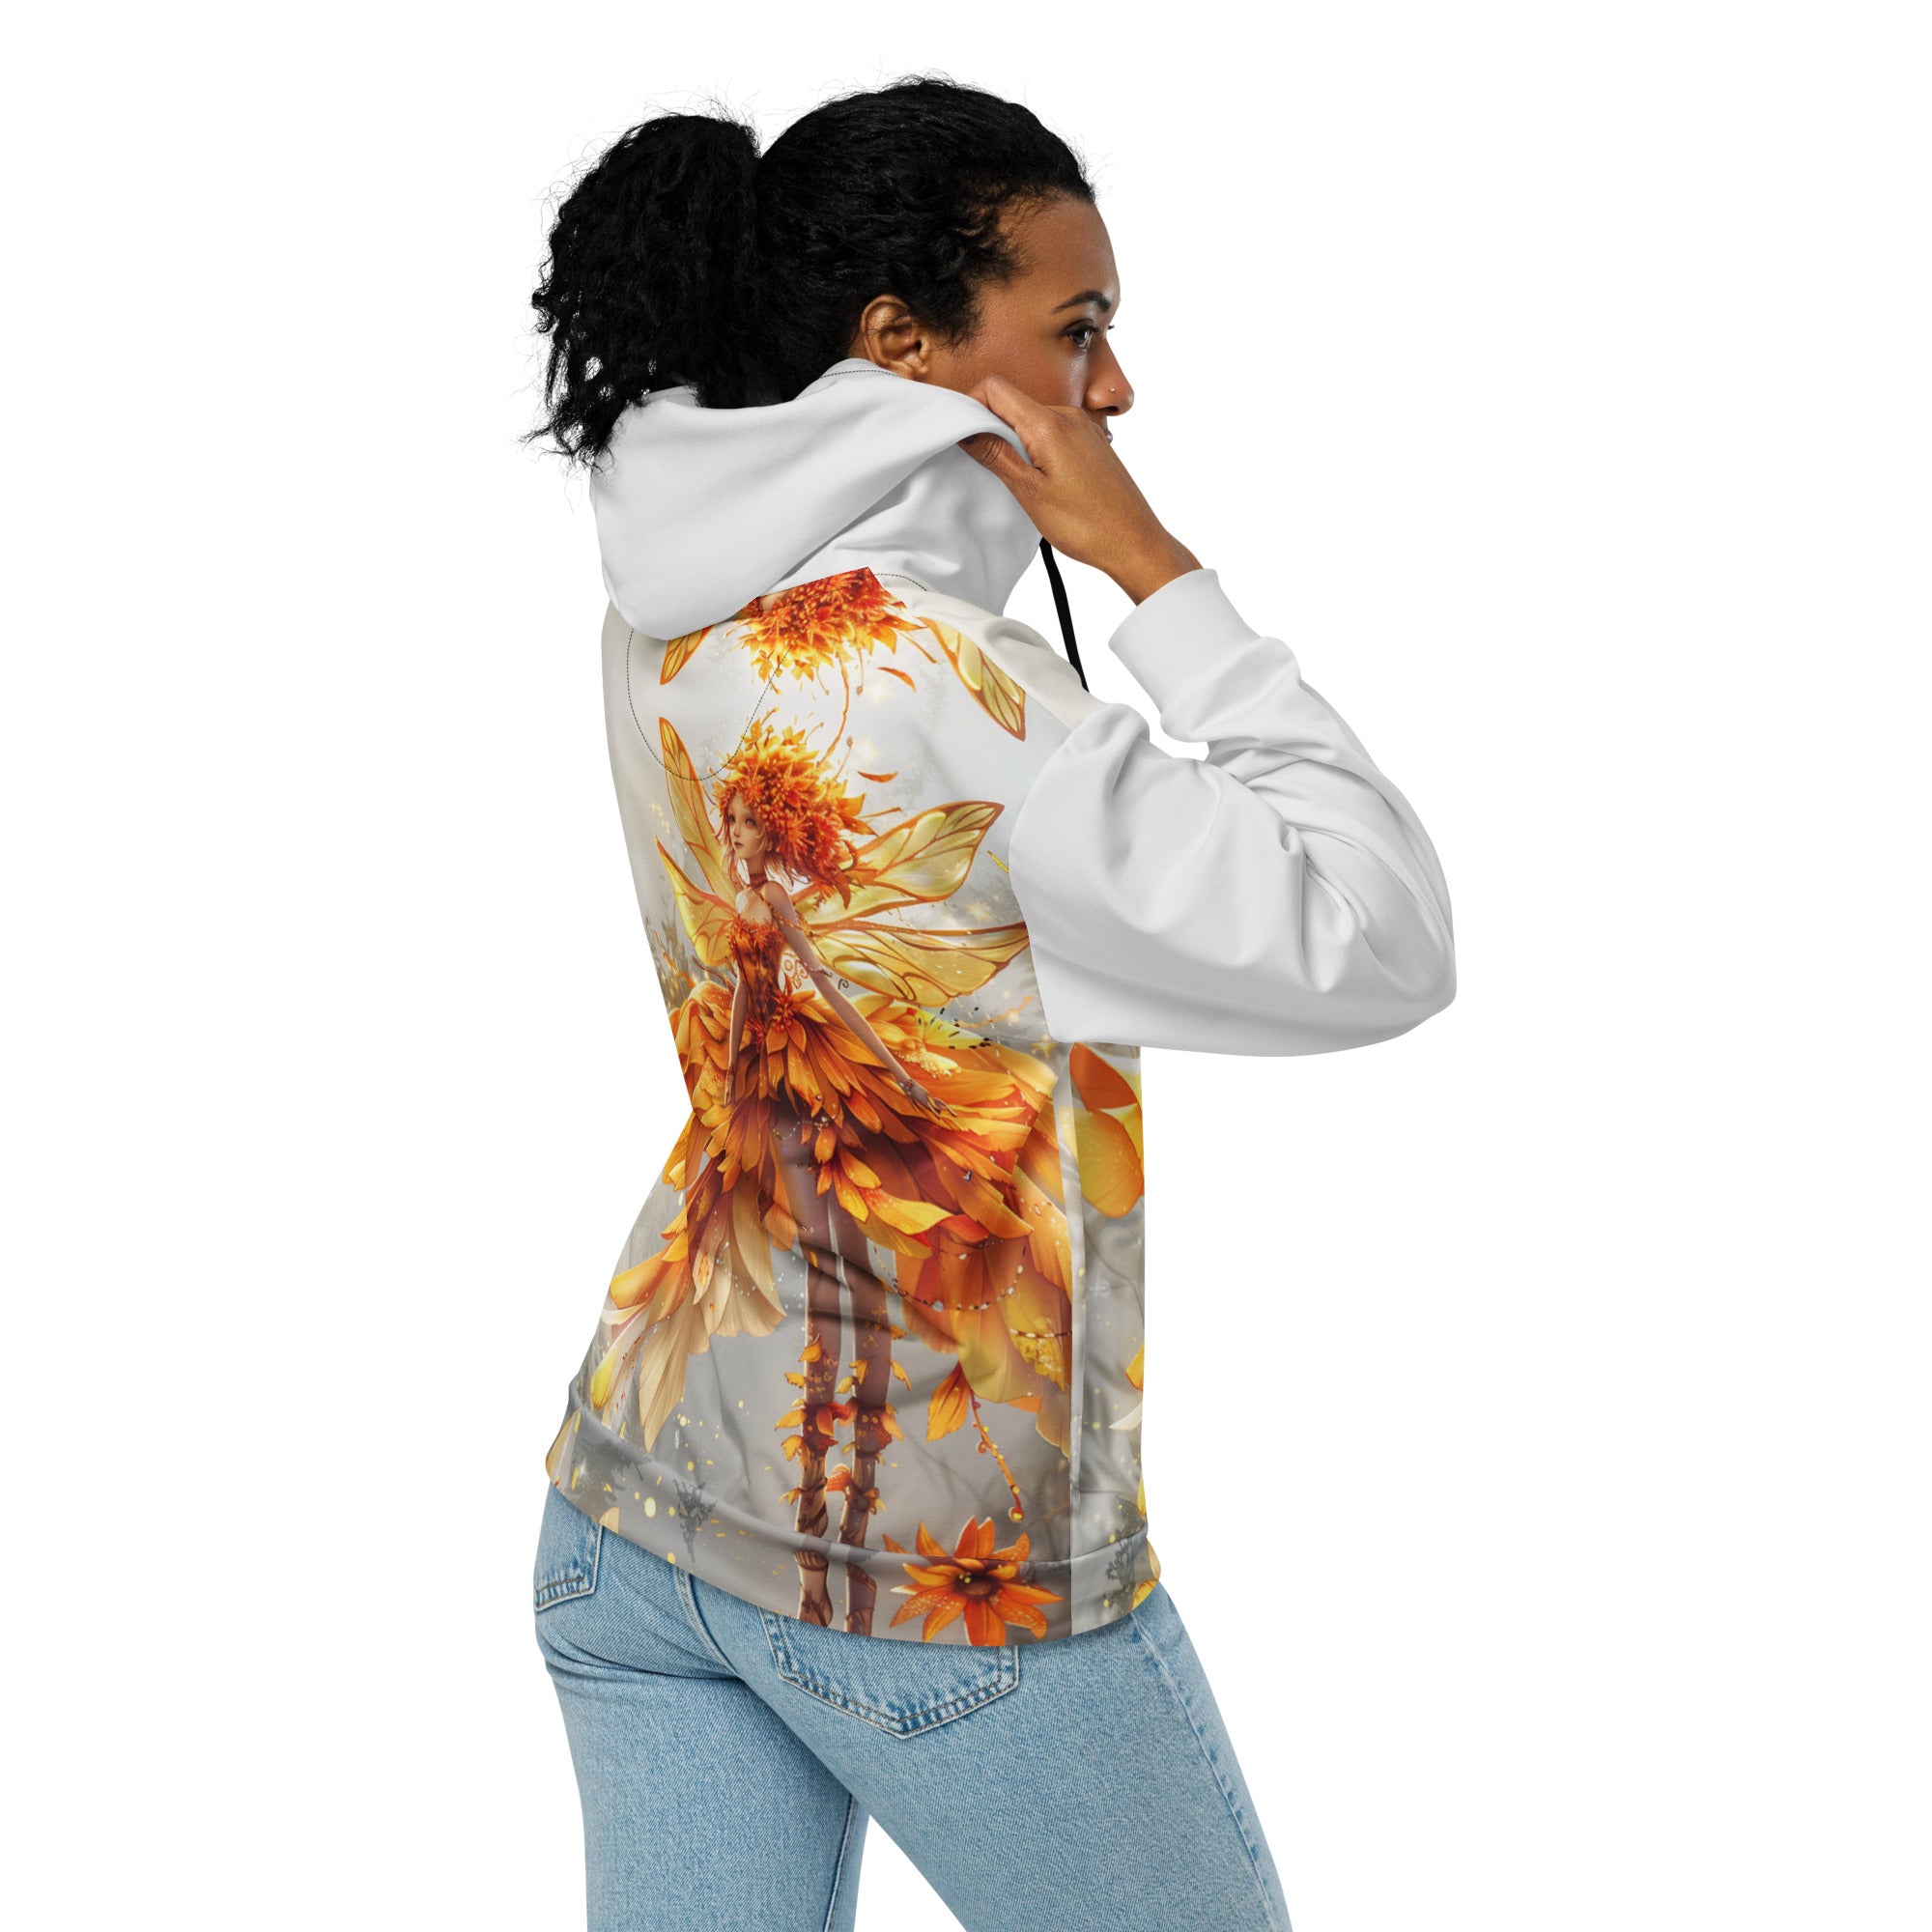 Sunflower Fairy Enchantment Zip Hoodie: A Sustainable Fashion Statement for Women and Girls